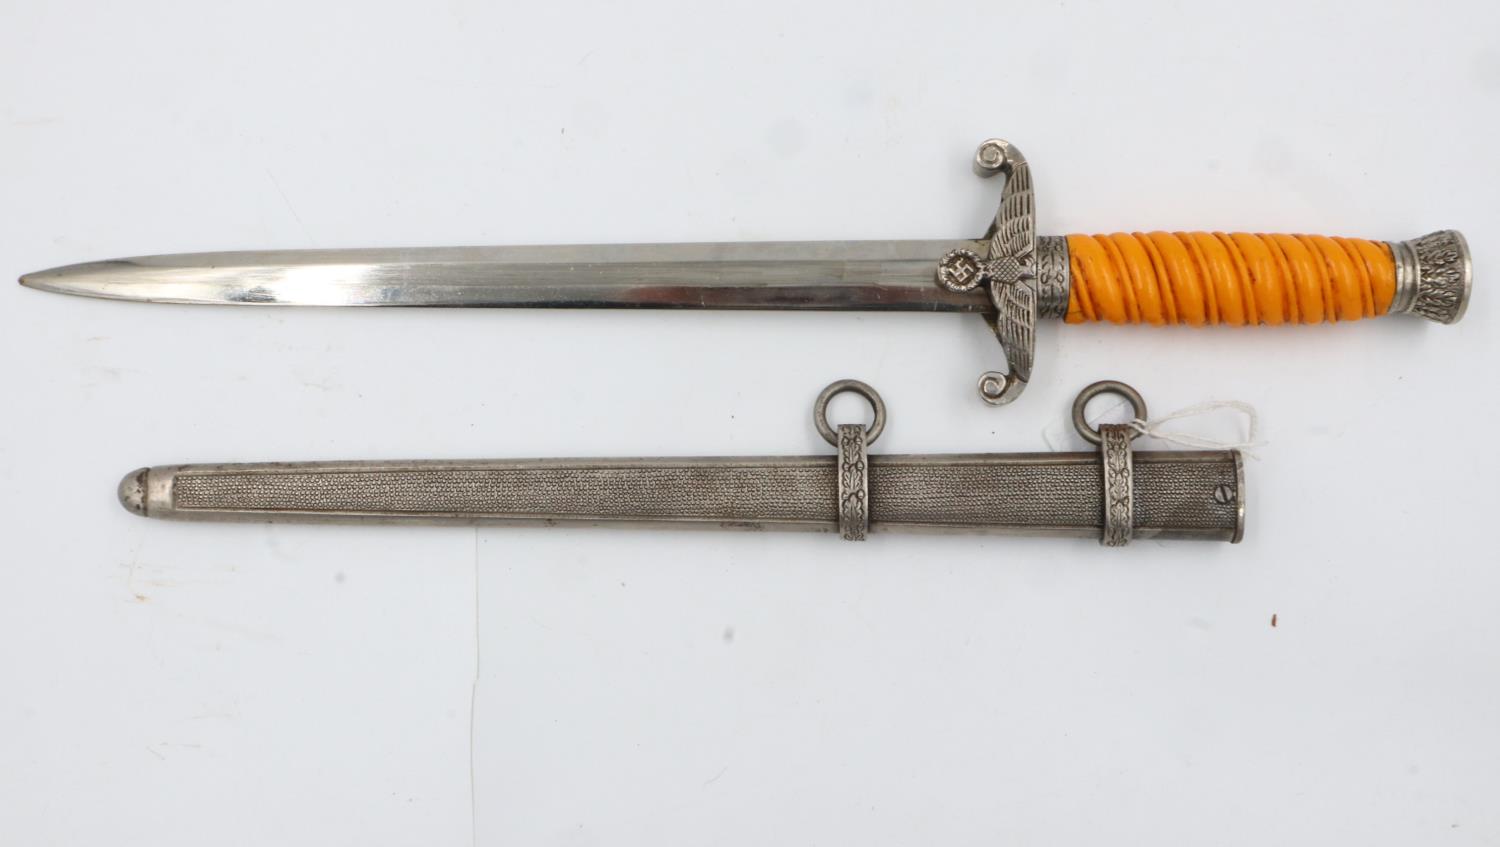 Third Reich late WWII unmarked Heer (Army) Officers dagger, with orange celluloid grip, pommel and